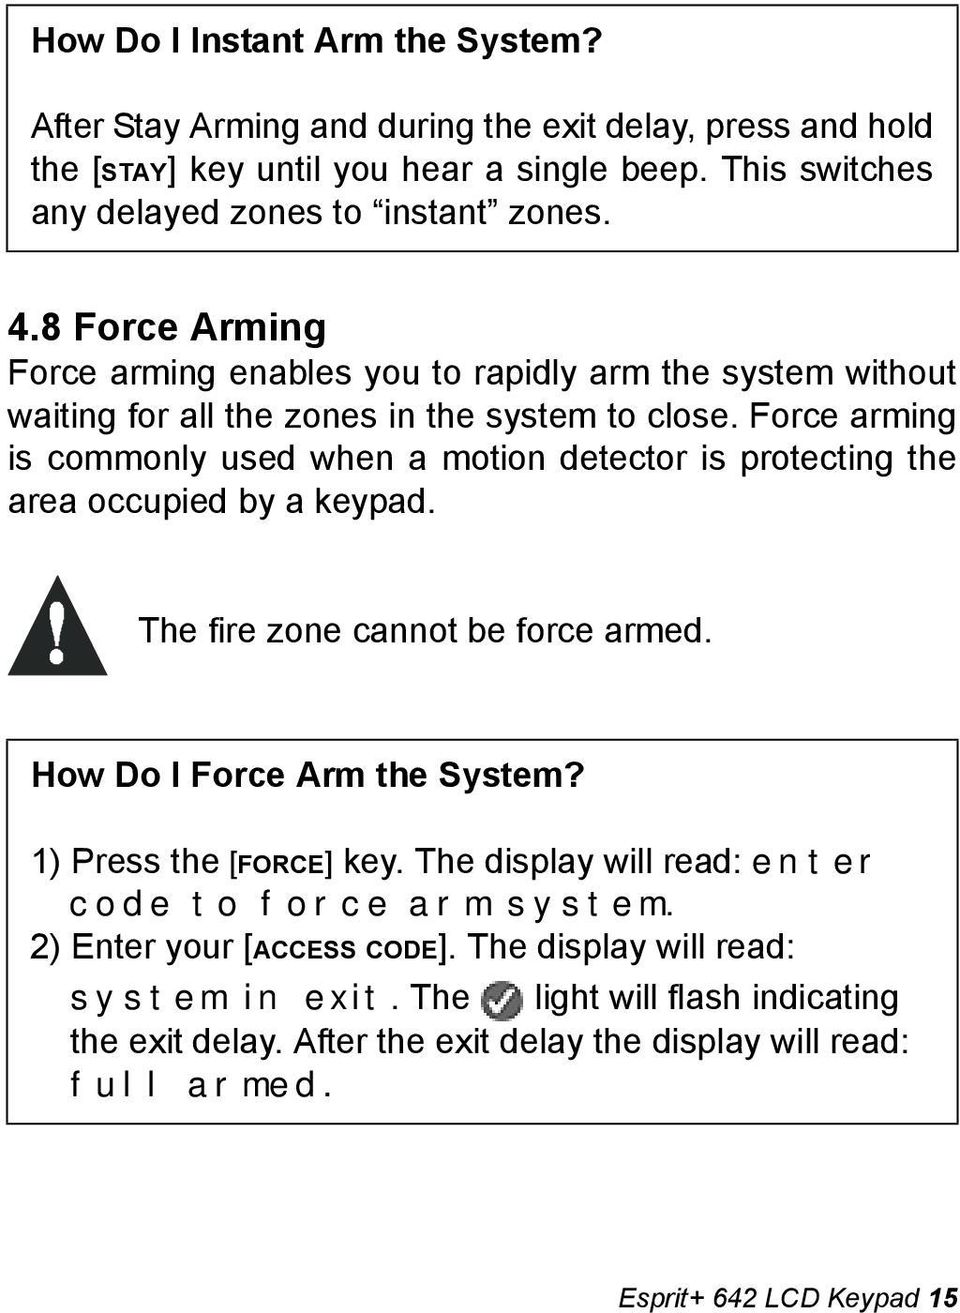 Force arming is commonly used when a motion detector is protecting the area occupied by a keypad. The fire zone cannot be force armed. How Do I Force Arm the System?